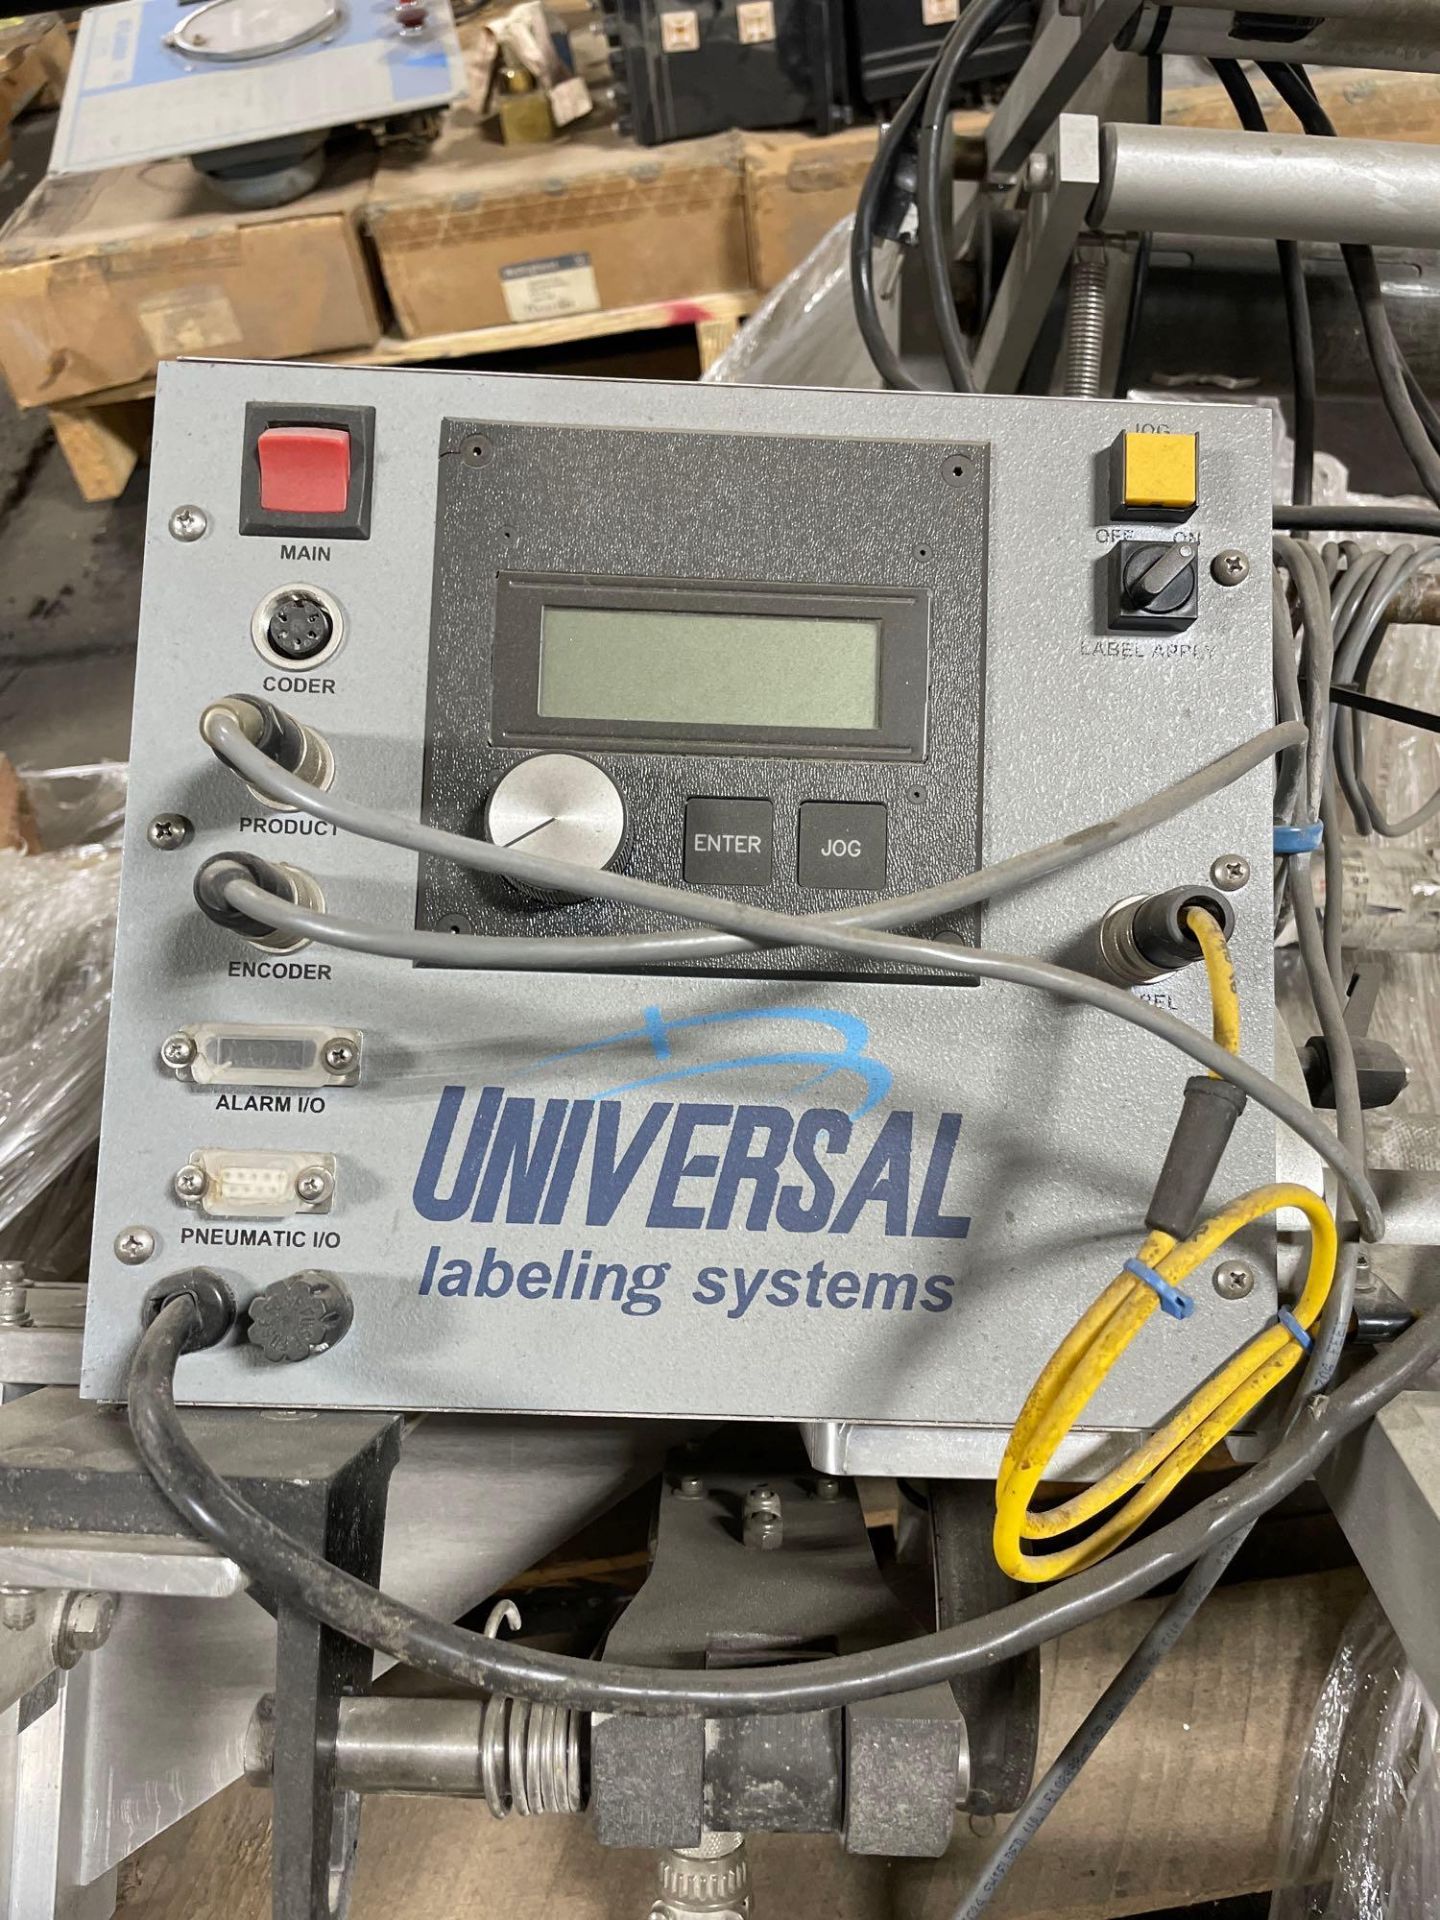 Universal labeling systems - Image 2 of 7